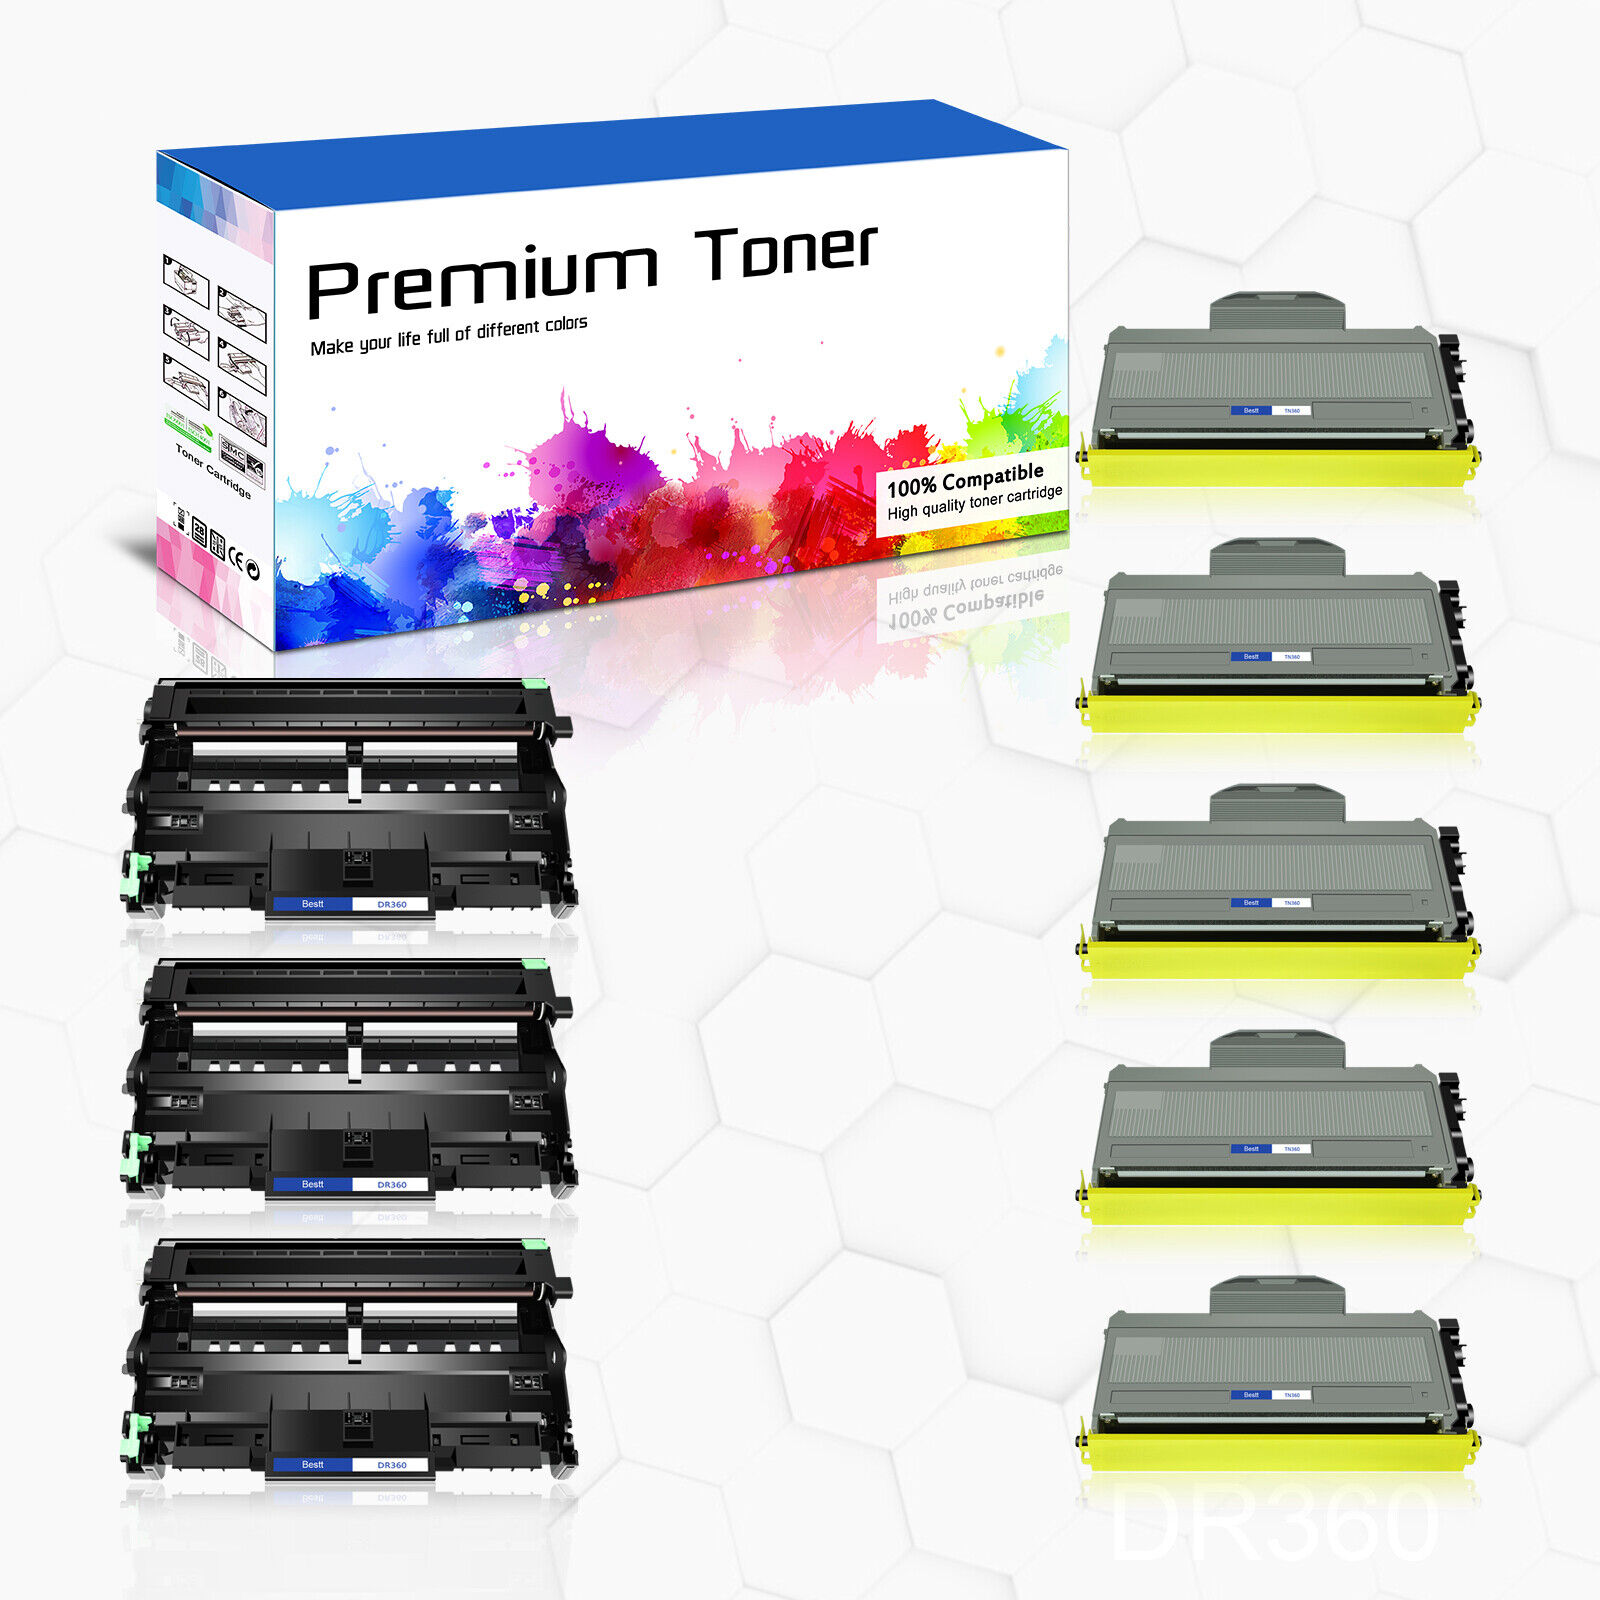 5x TN360 Toner + 3x DR360 Drum Compatible for Brother DCP-7040 MFC-7320 HL-2150N